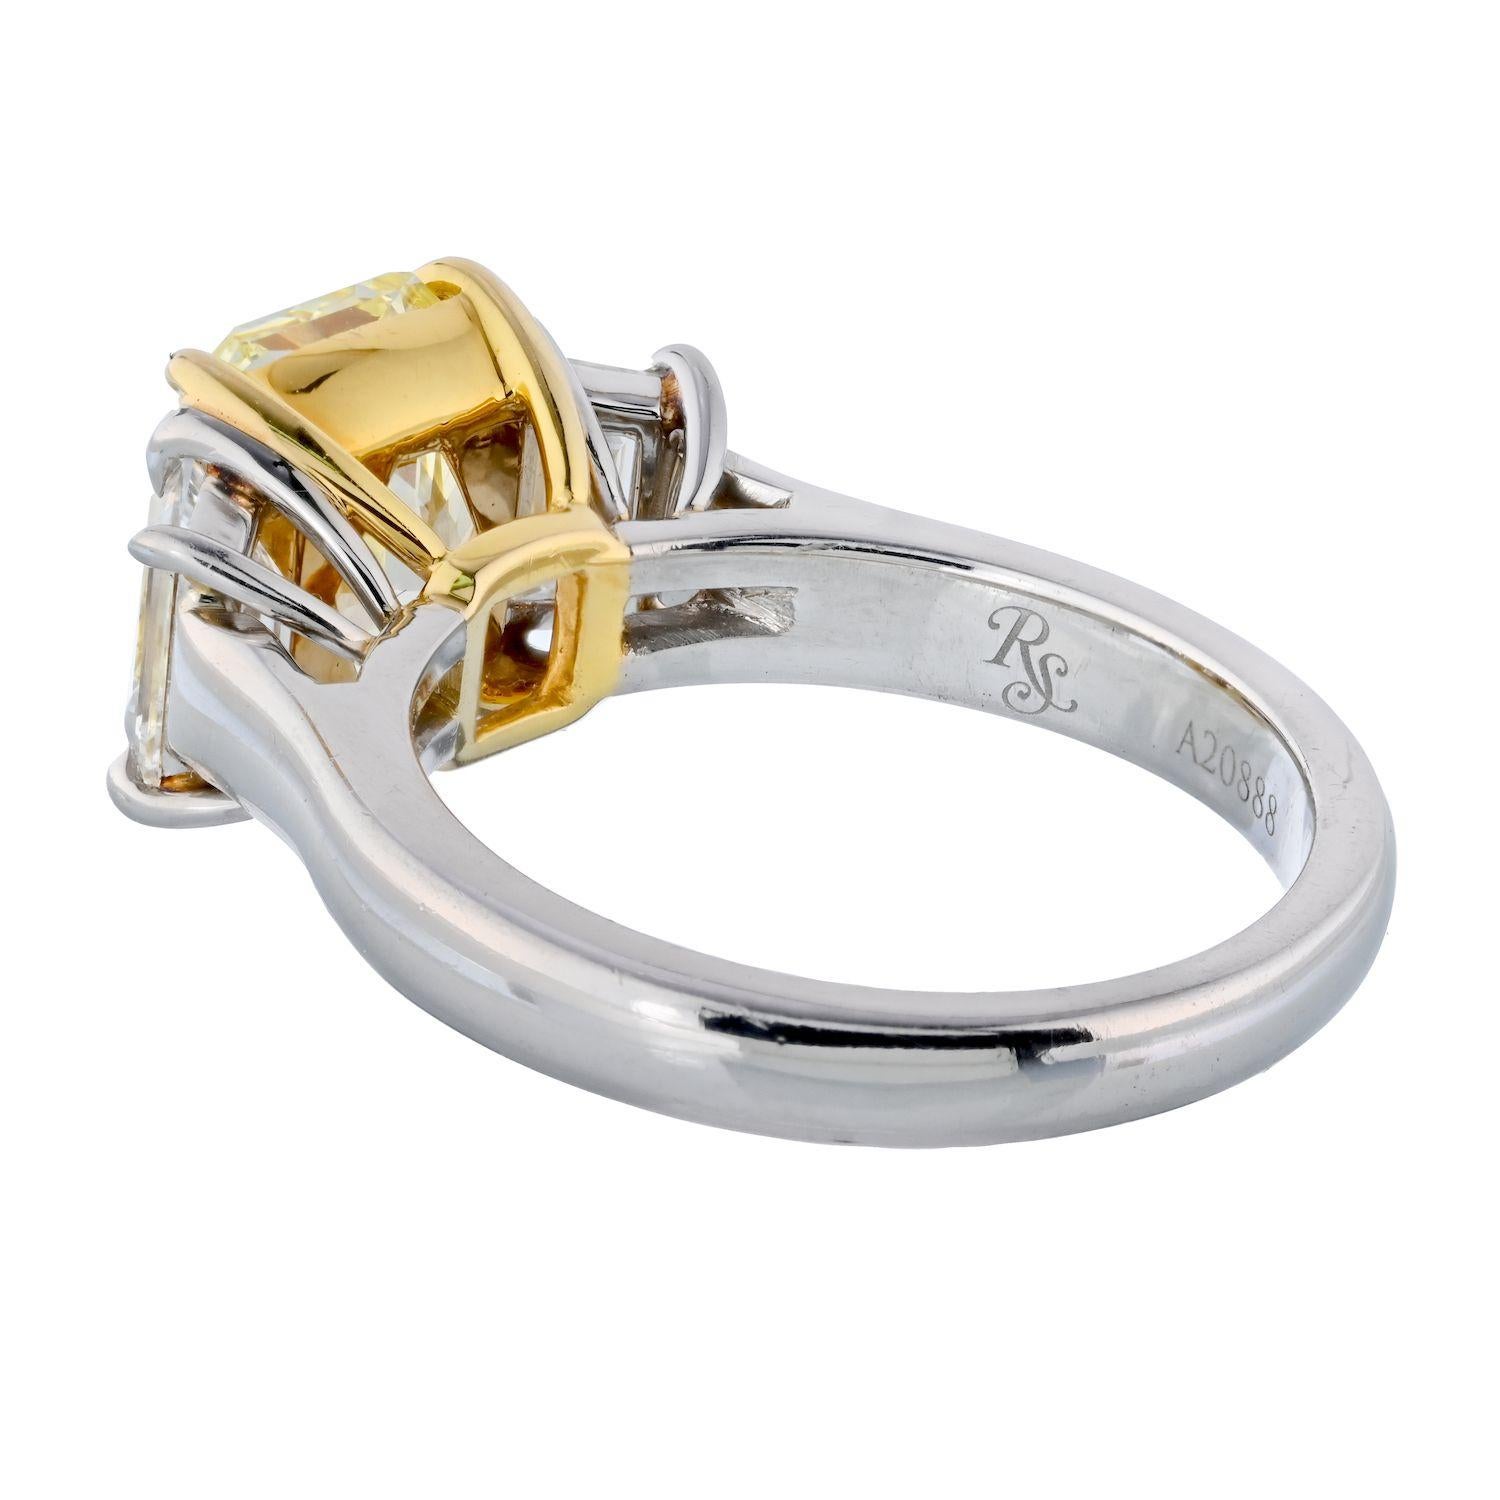 Three-stone diamond engagement ring mounted with three beautiful diamonds. The center radiant cut diamond weighs 3.21cts and is flanked by two trapezoid-cut white diamonds. Mounted in platinum with yellow-gold center basket. 
Report: GIA